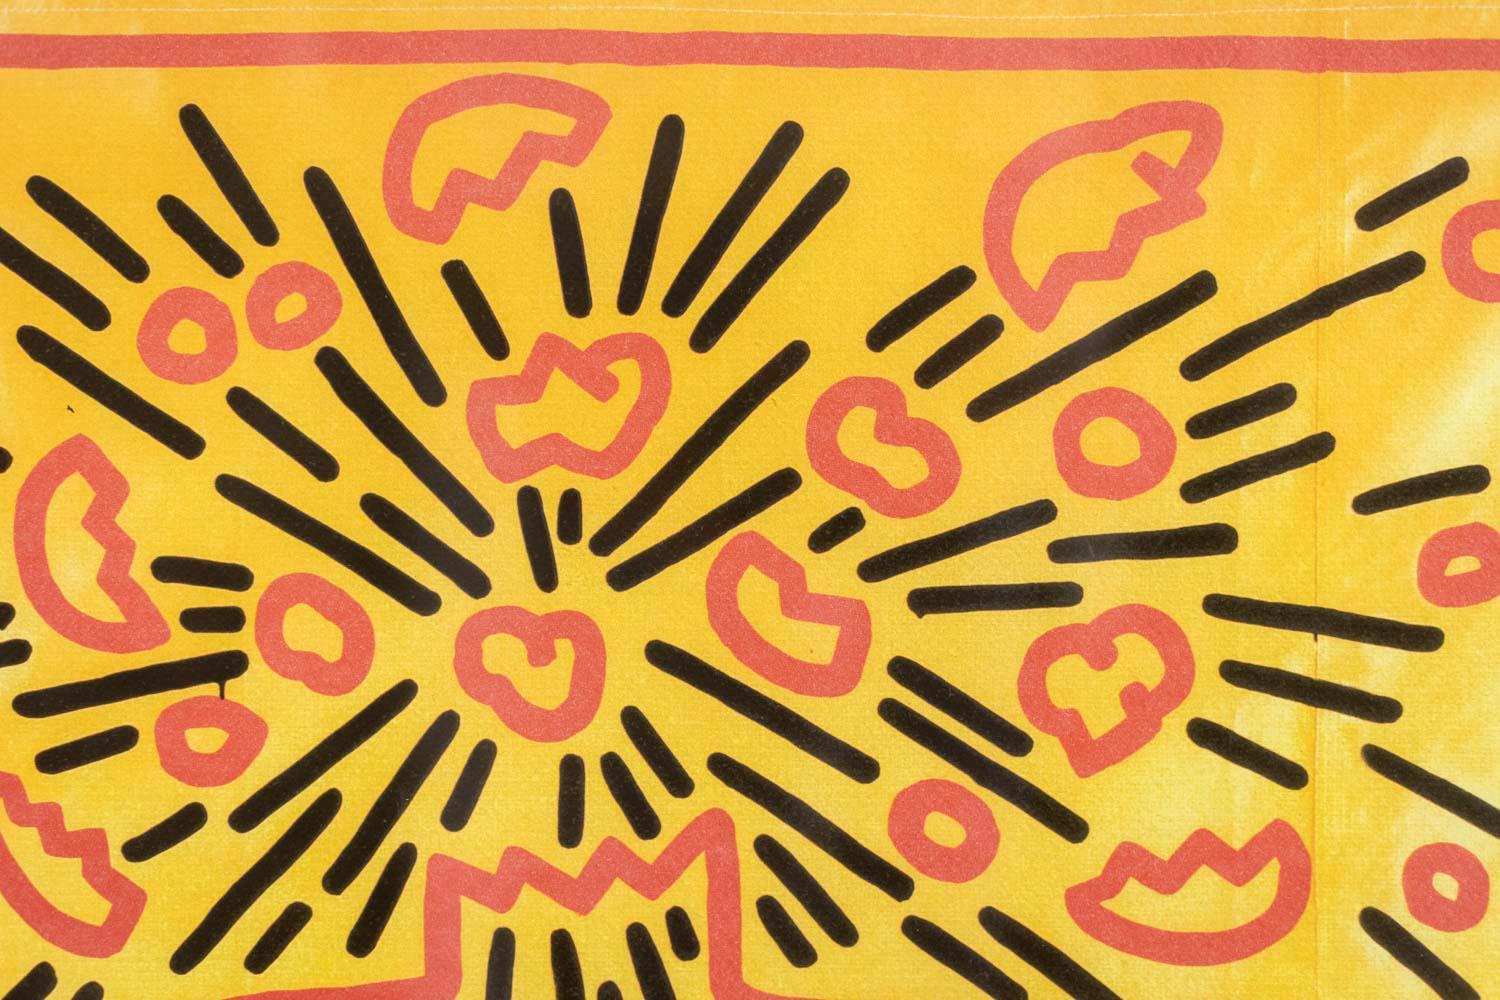 Keith Haring, signed and numbered.

Abstract silkscreen, suggesting a schematic figure, in shades of yellow, orange and black in its blond oak frame.

Numbered 18/150.

American work realized in the 1990s.

Dimensions: W 50 x H 70 x D 2